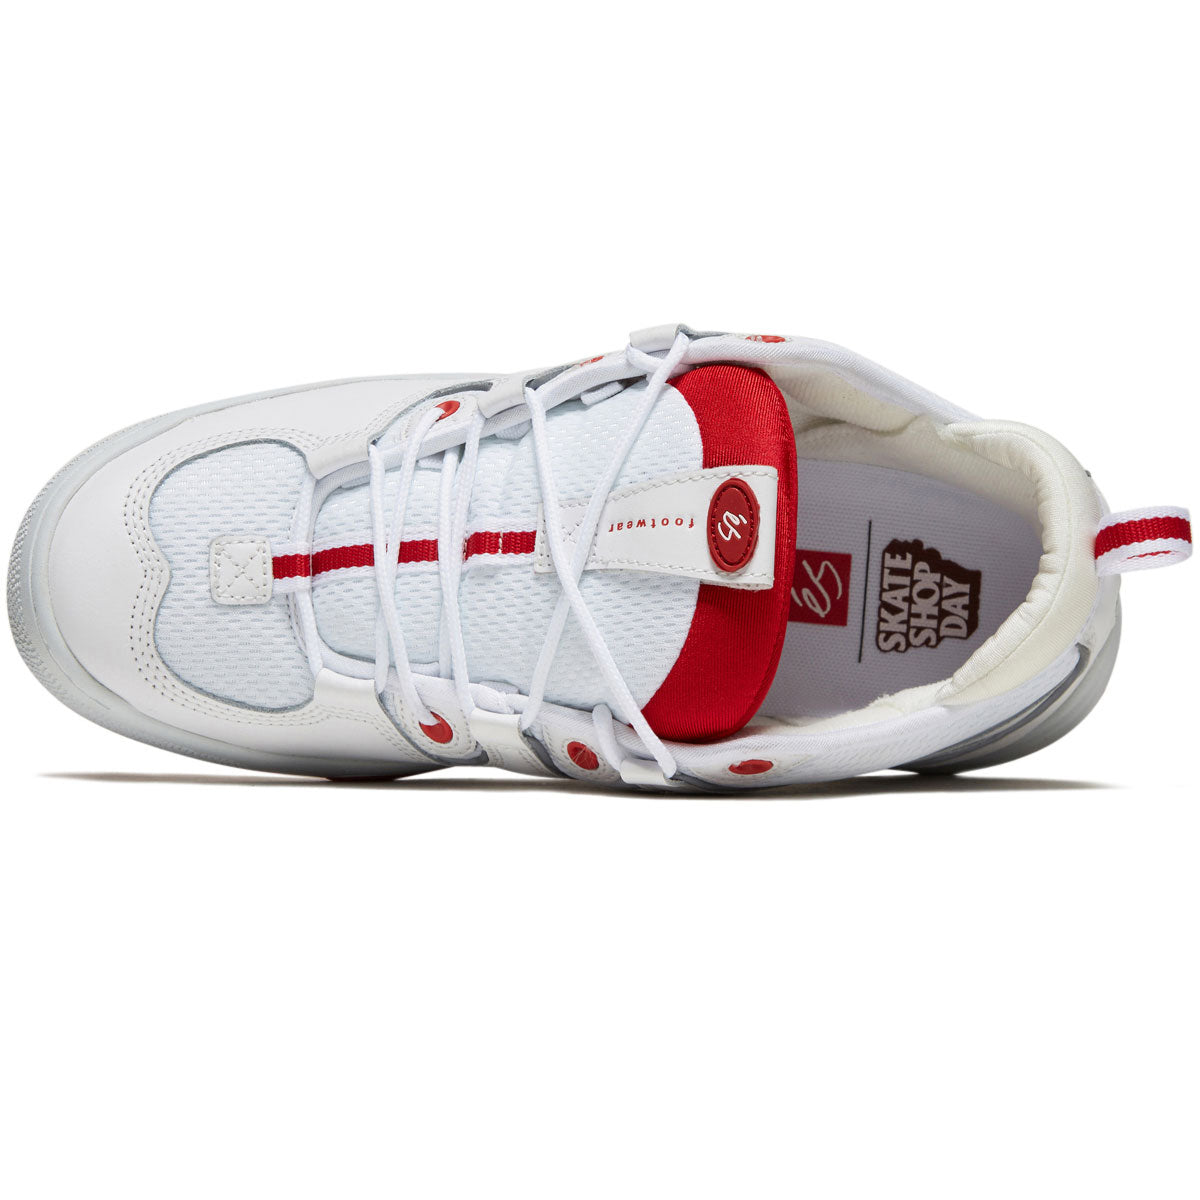 eS Two Nine 8 Skate Shop Day Shoes - White/Red image 3